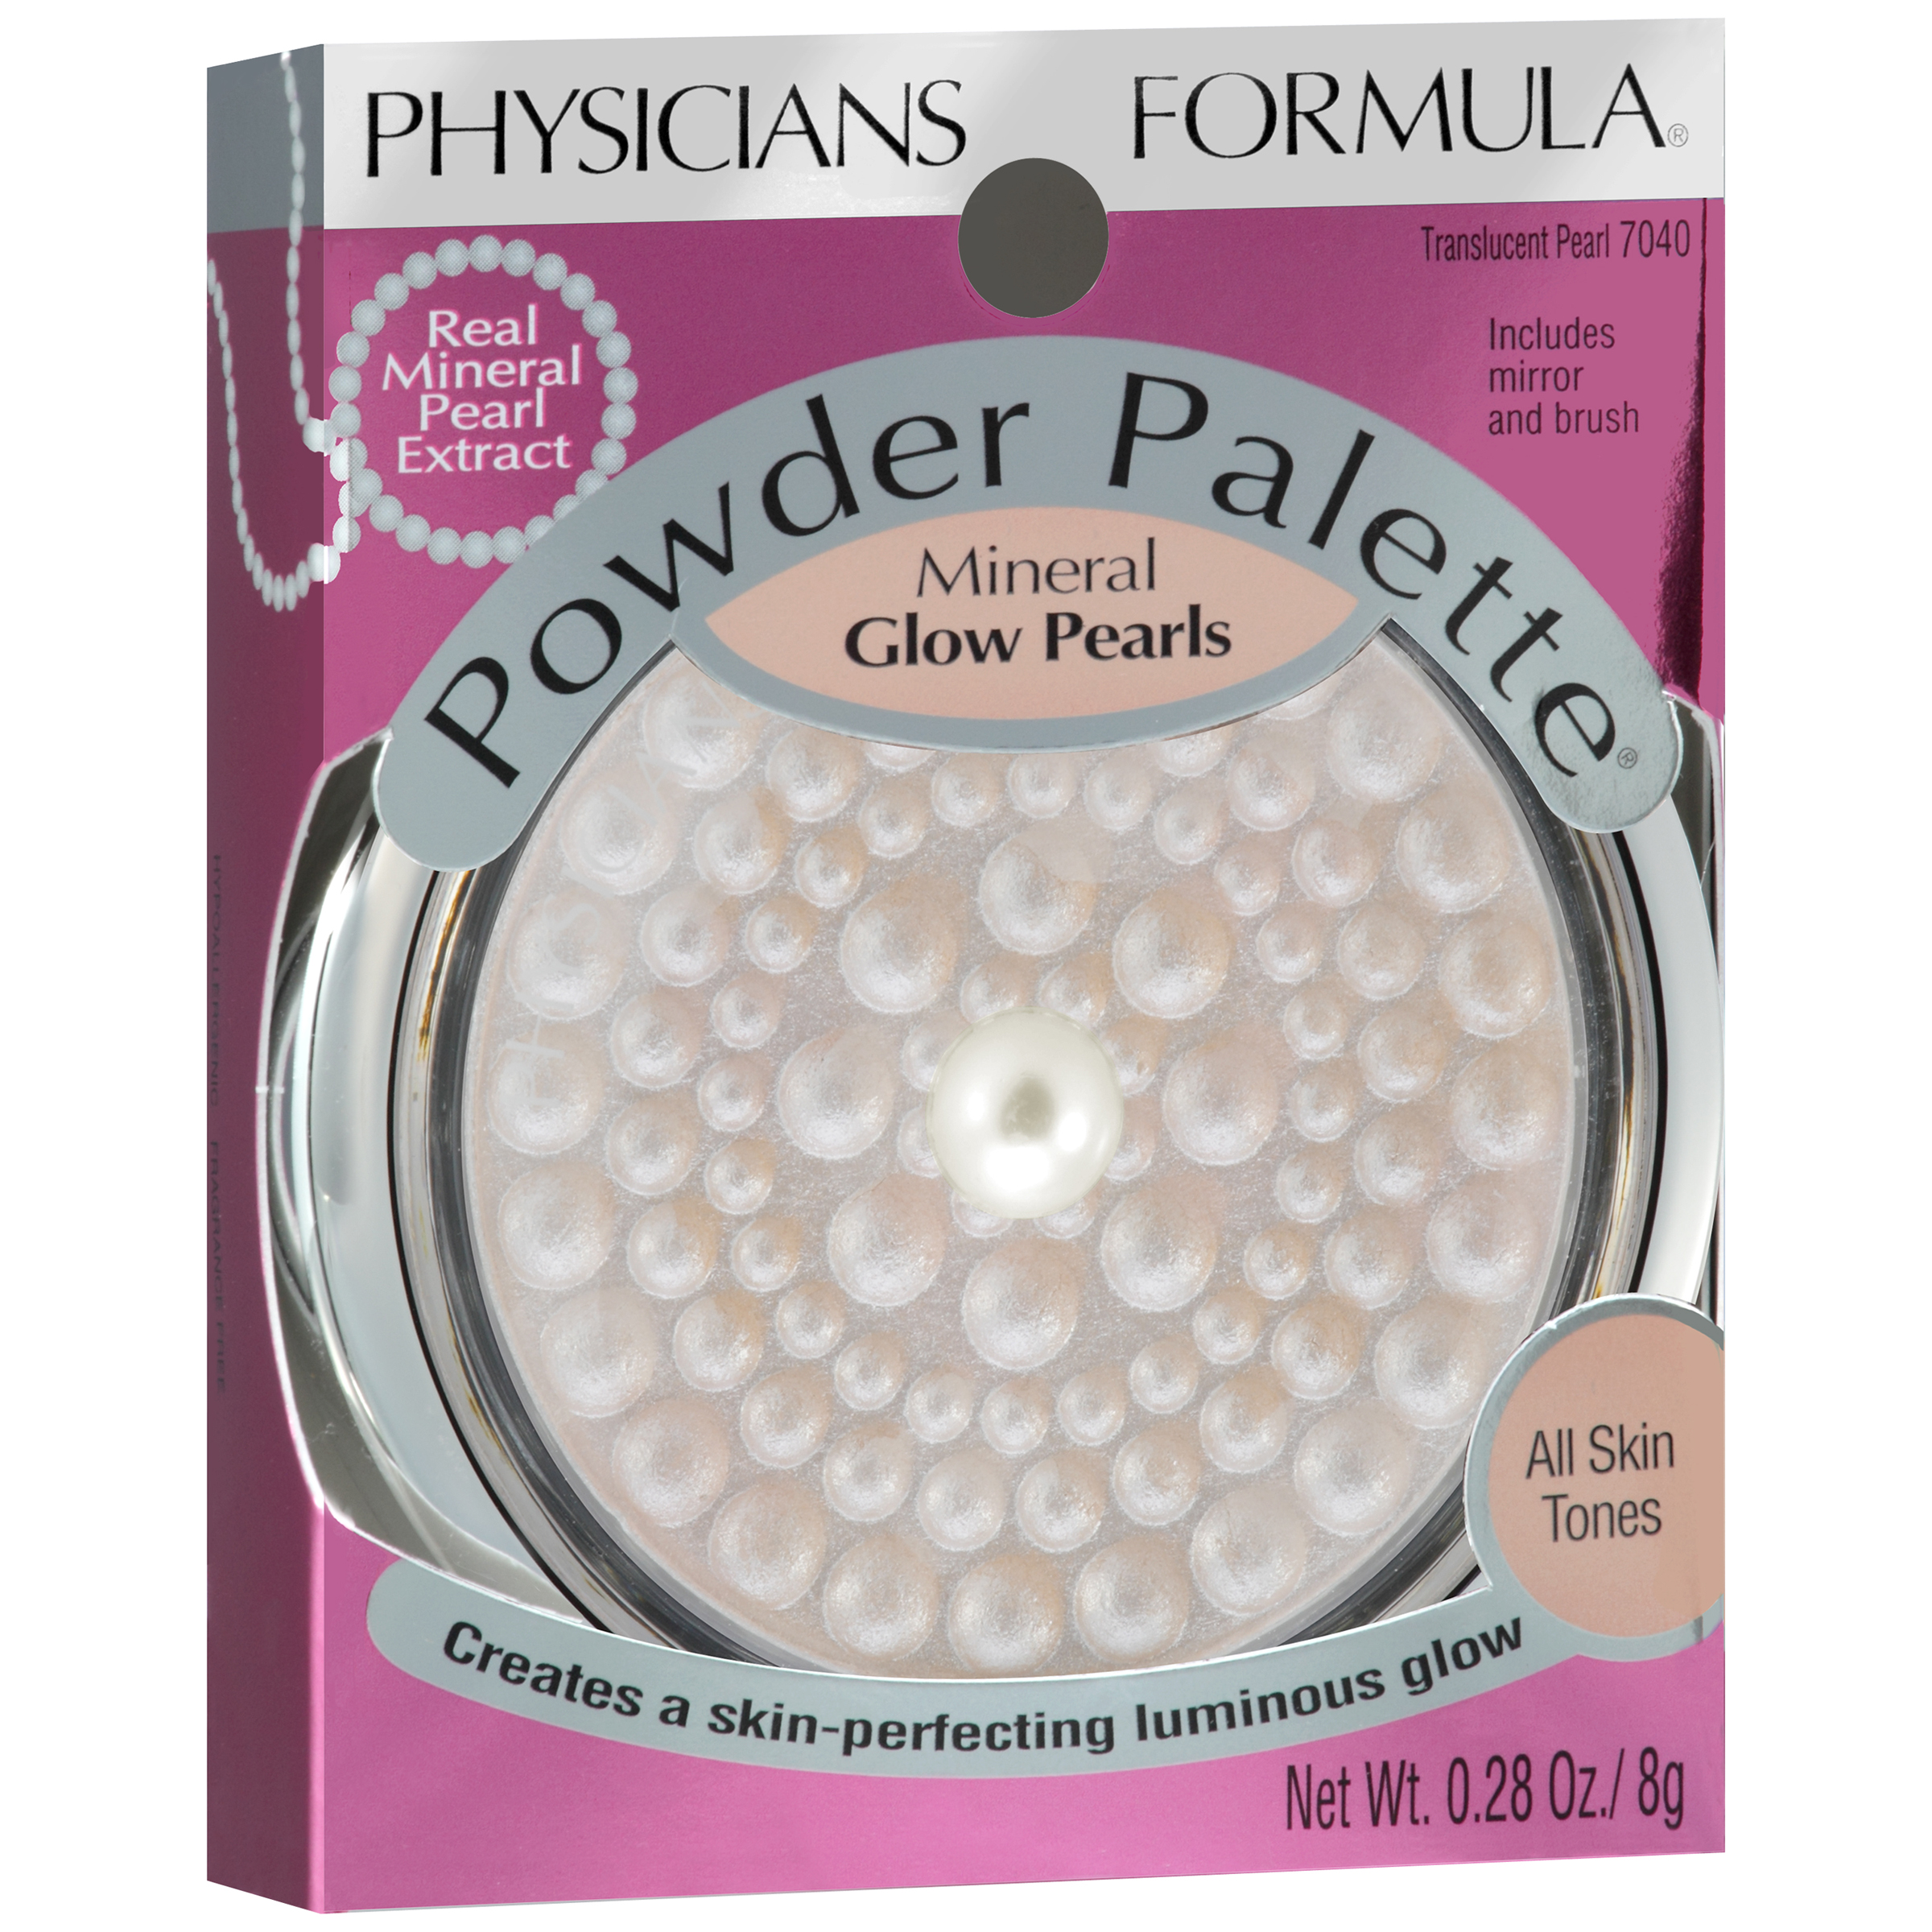 Physicians Formula Powder Palette&#174; Mineral Glow Pearls